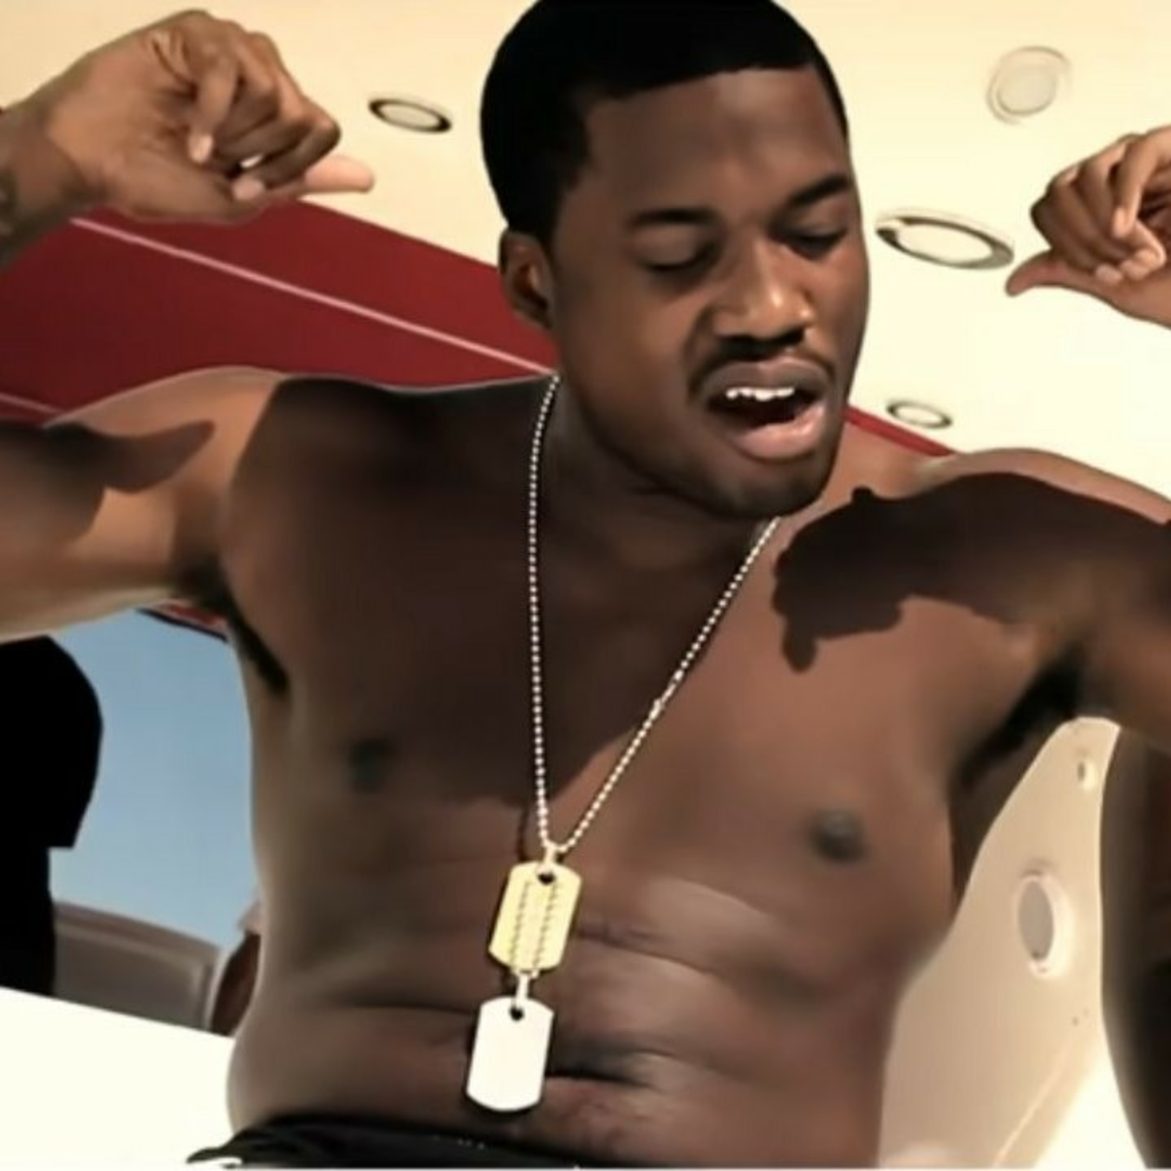 Black Podcasting - Meek Mill Nudes Found in Tosh's Cell Phone